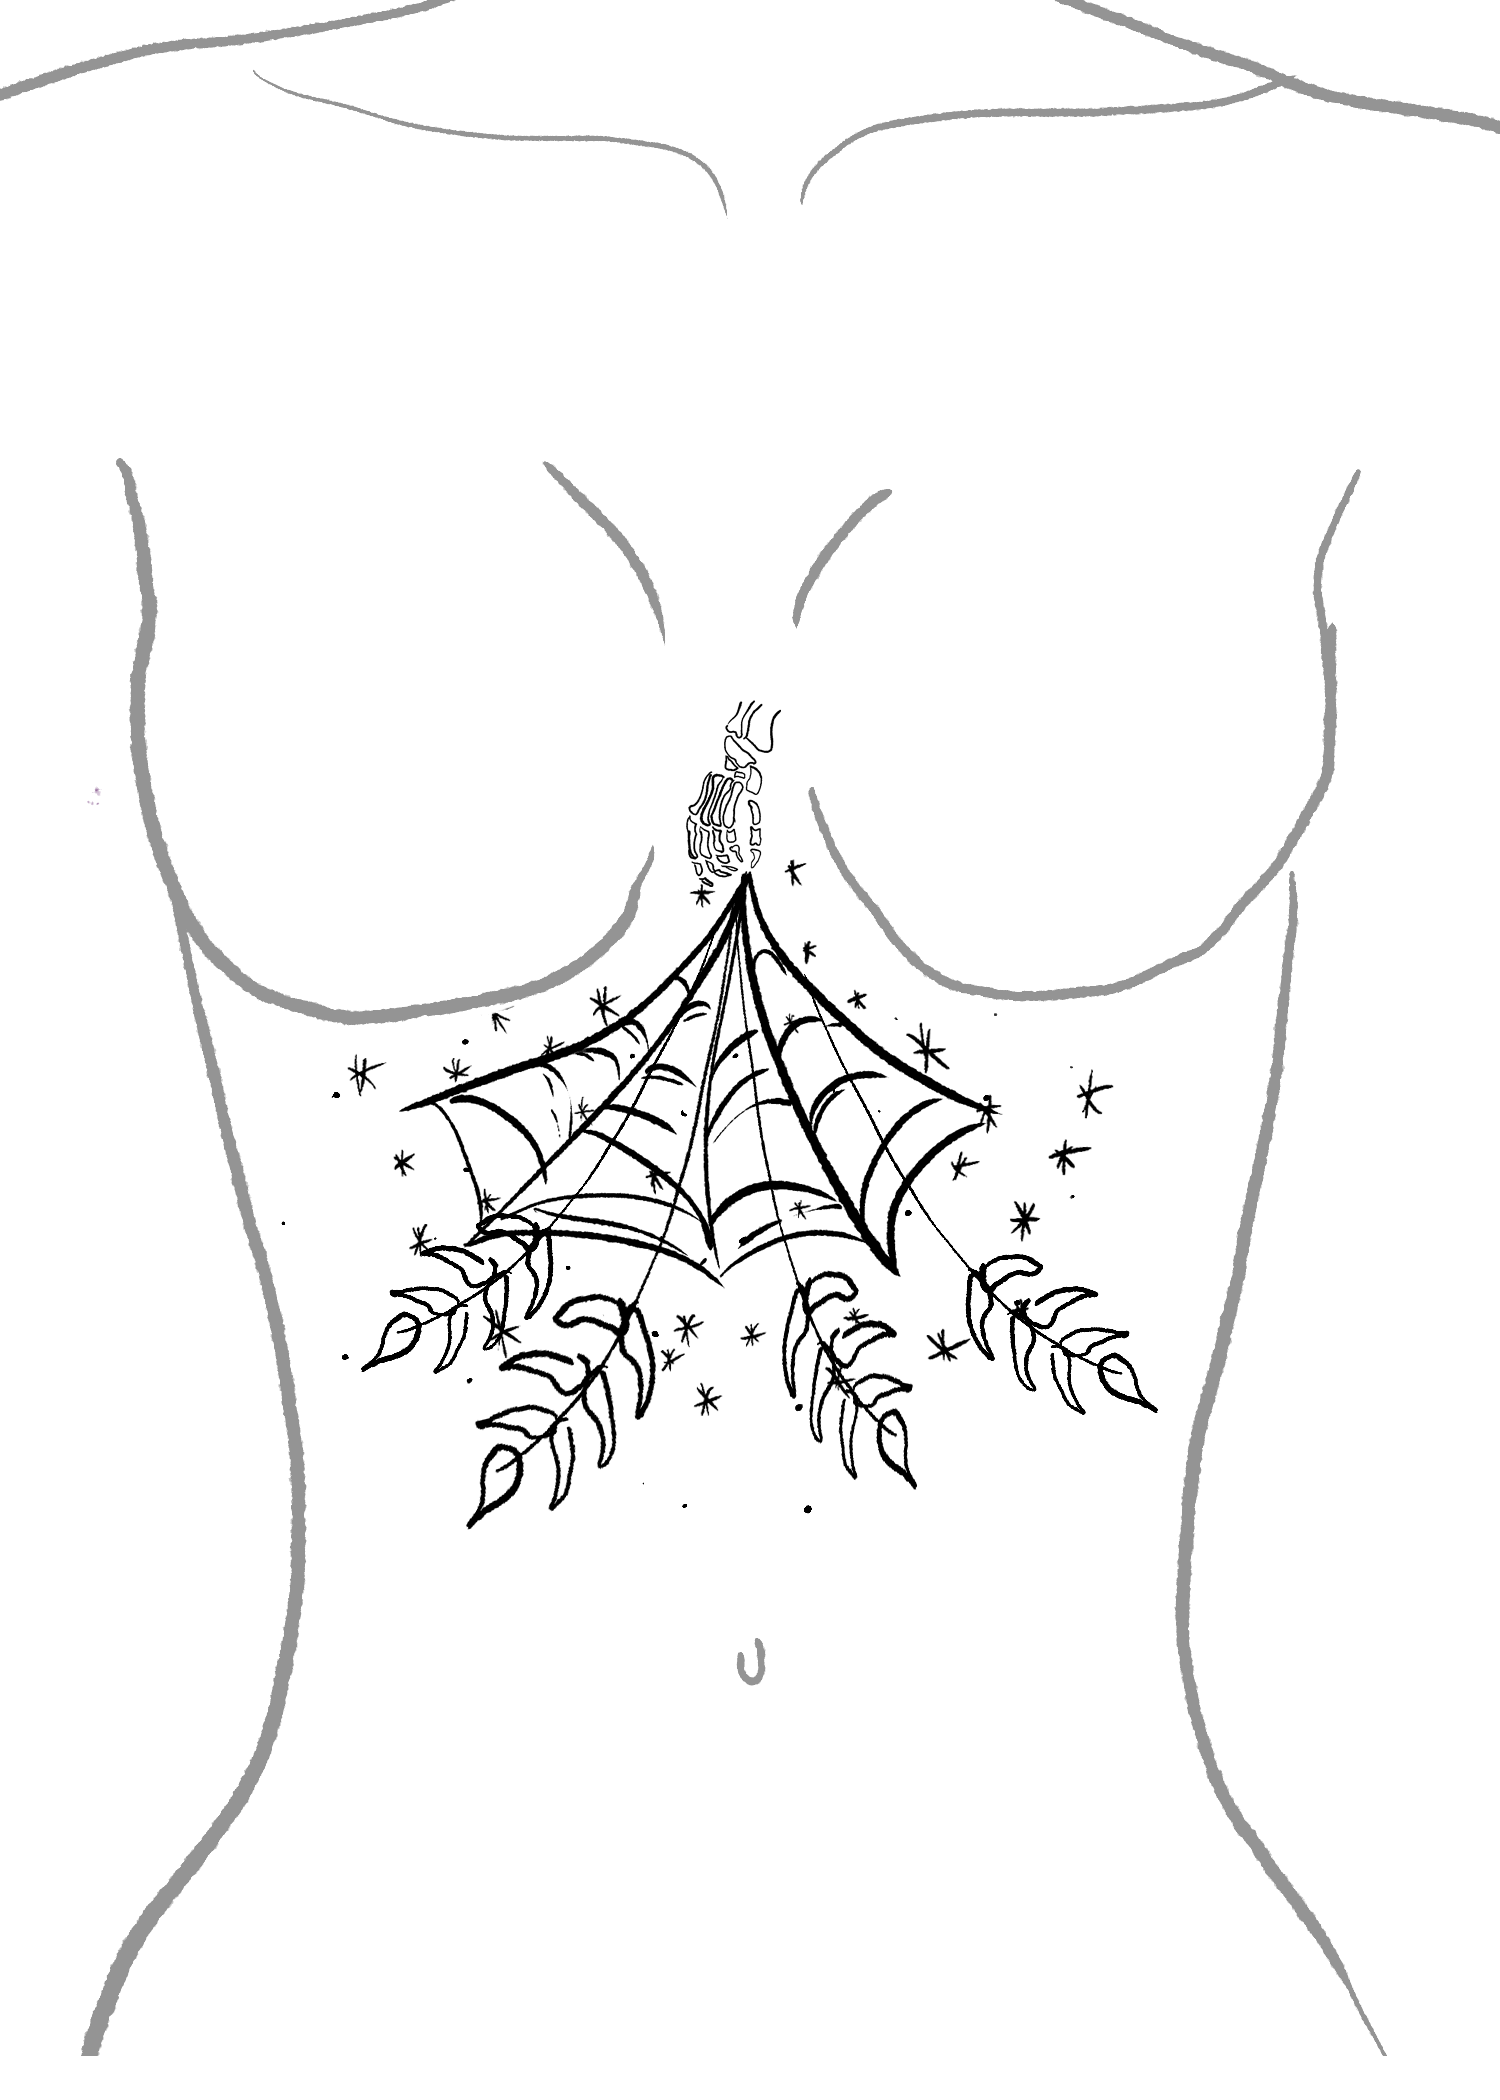 Share more than 76 sternum tattoo drawings latest - in.eteachers